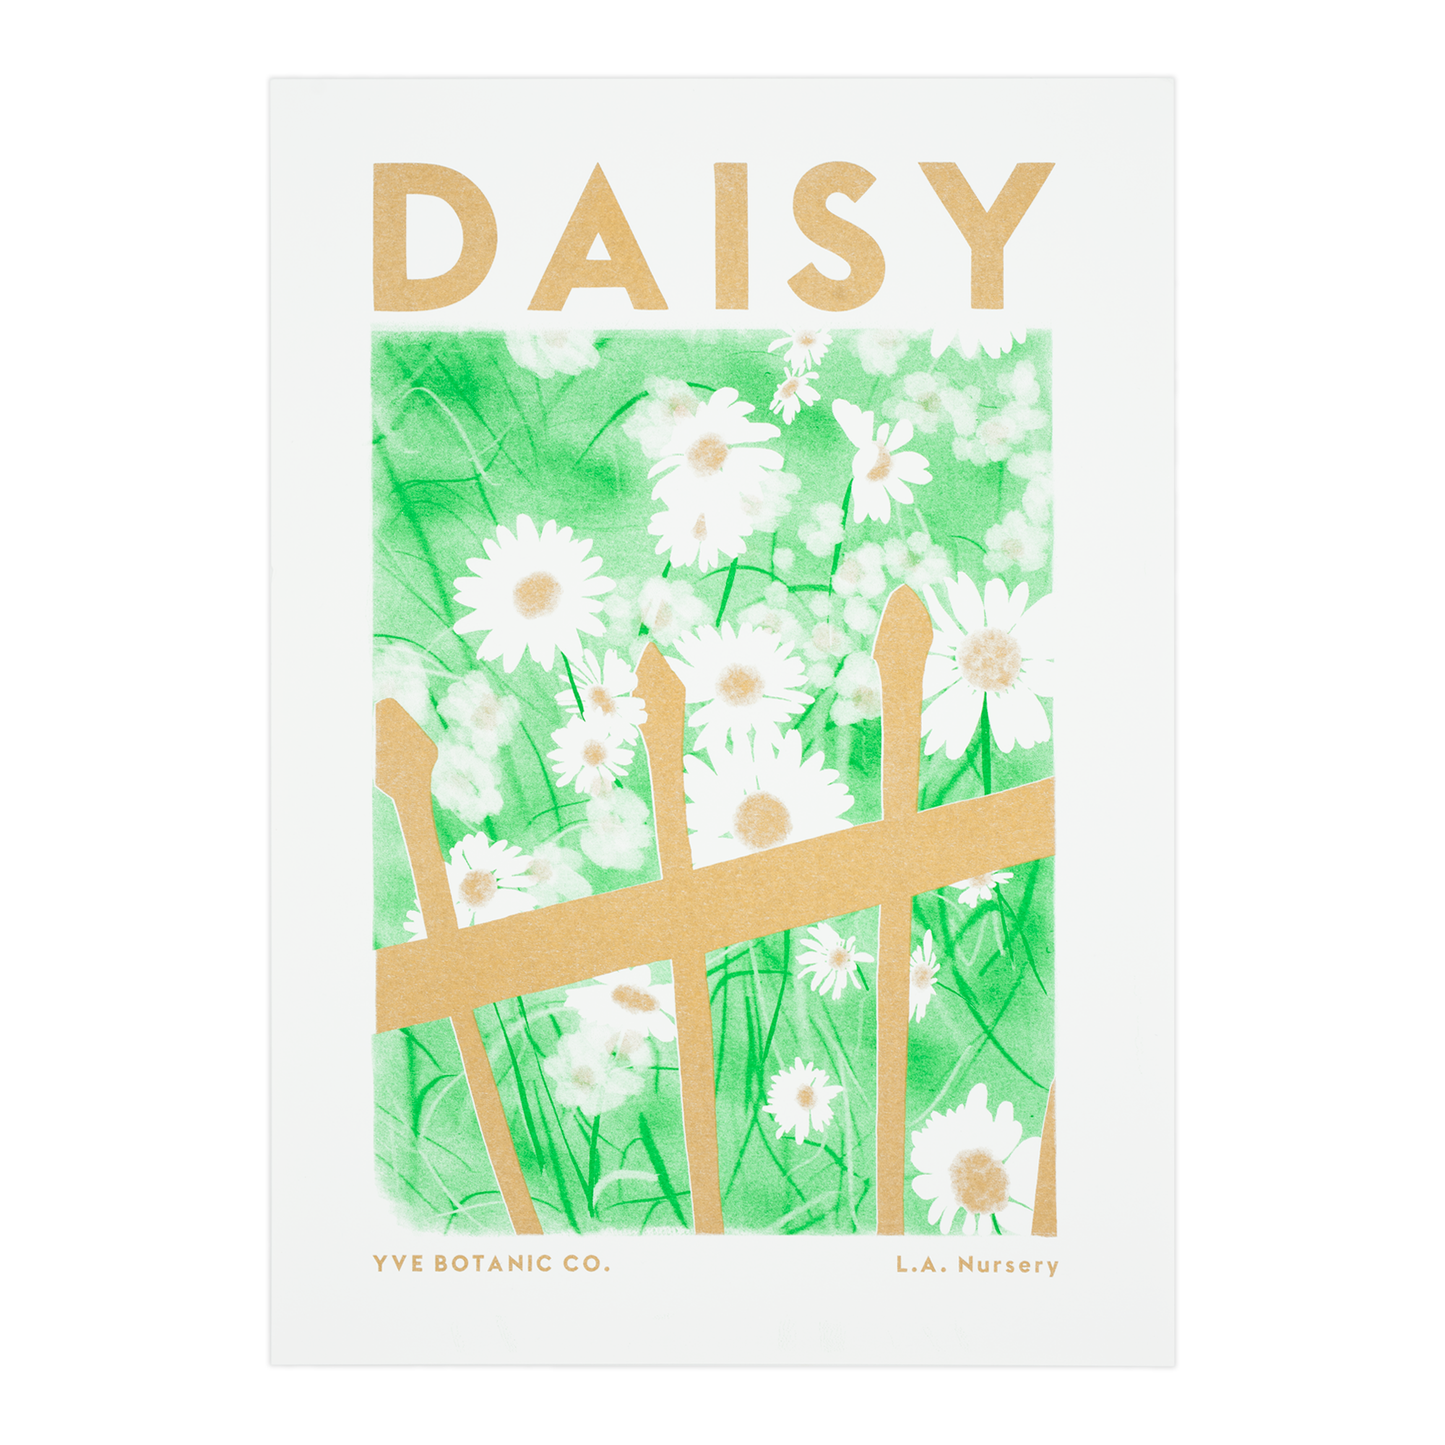 A risograph print of a daisy and fence with the word Daisy at the top. White background in image.